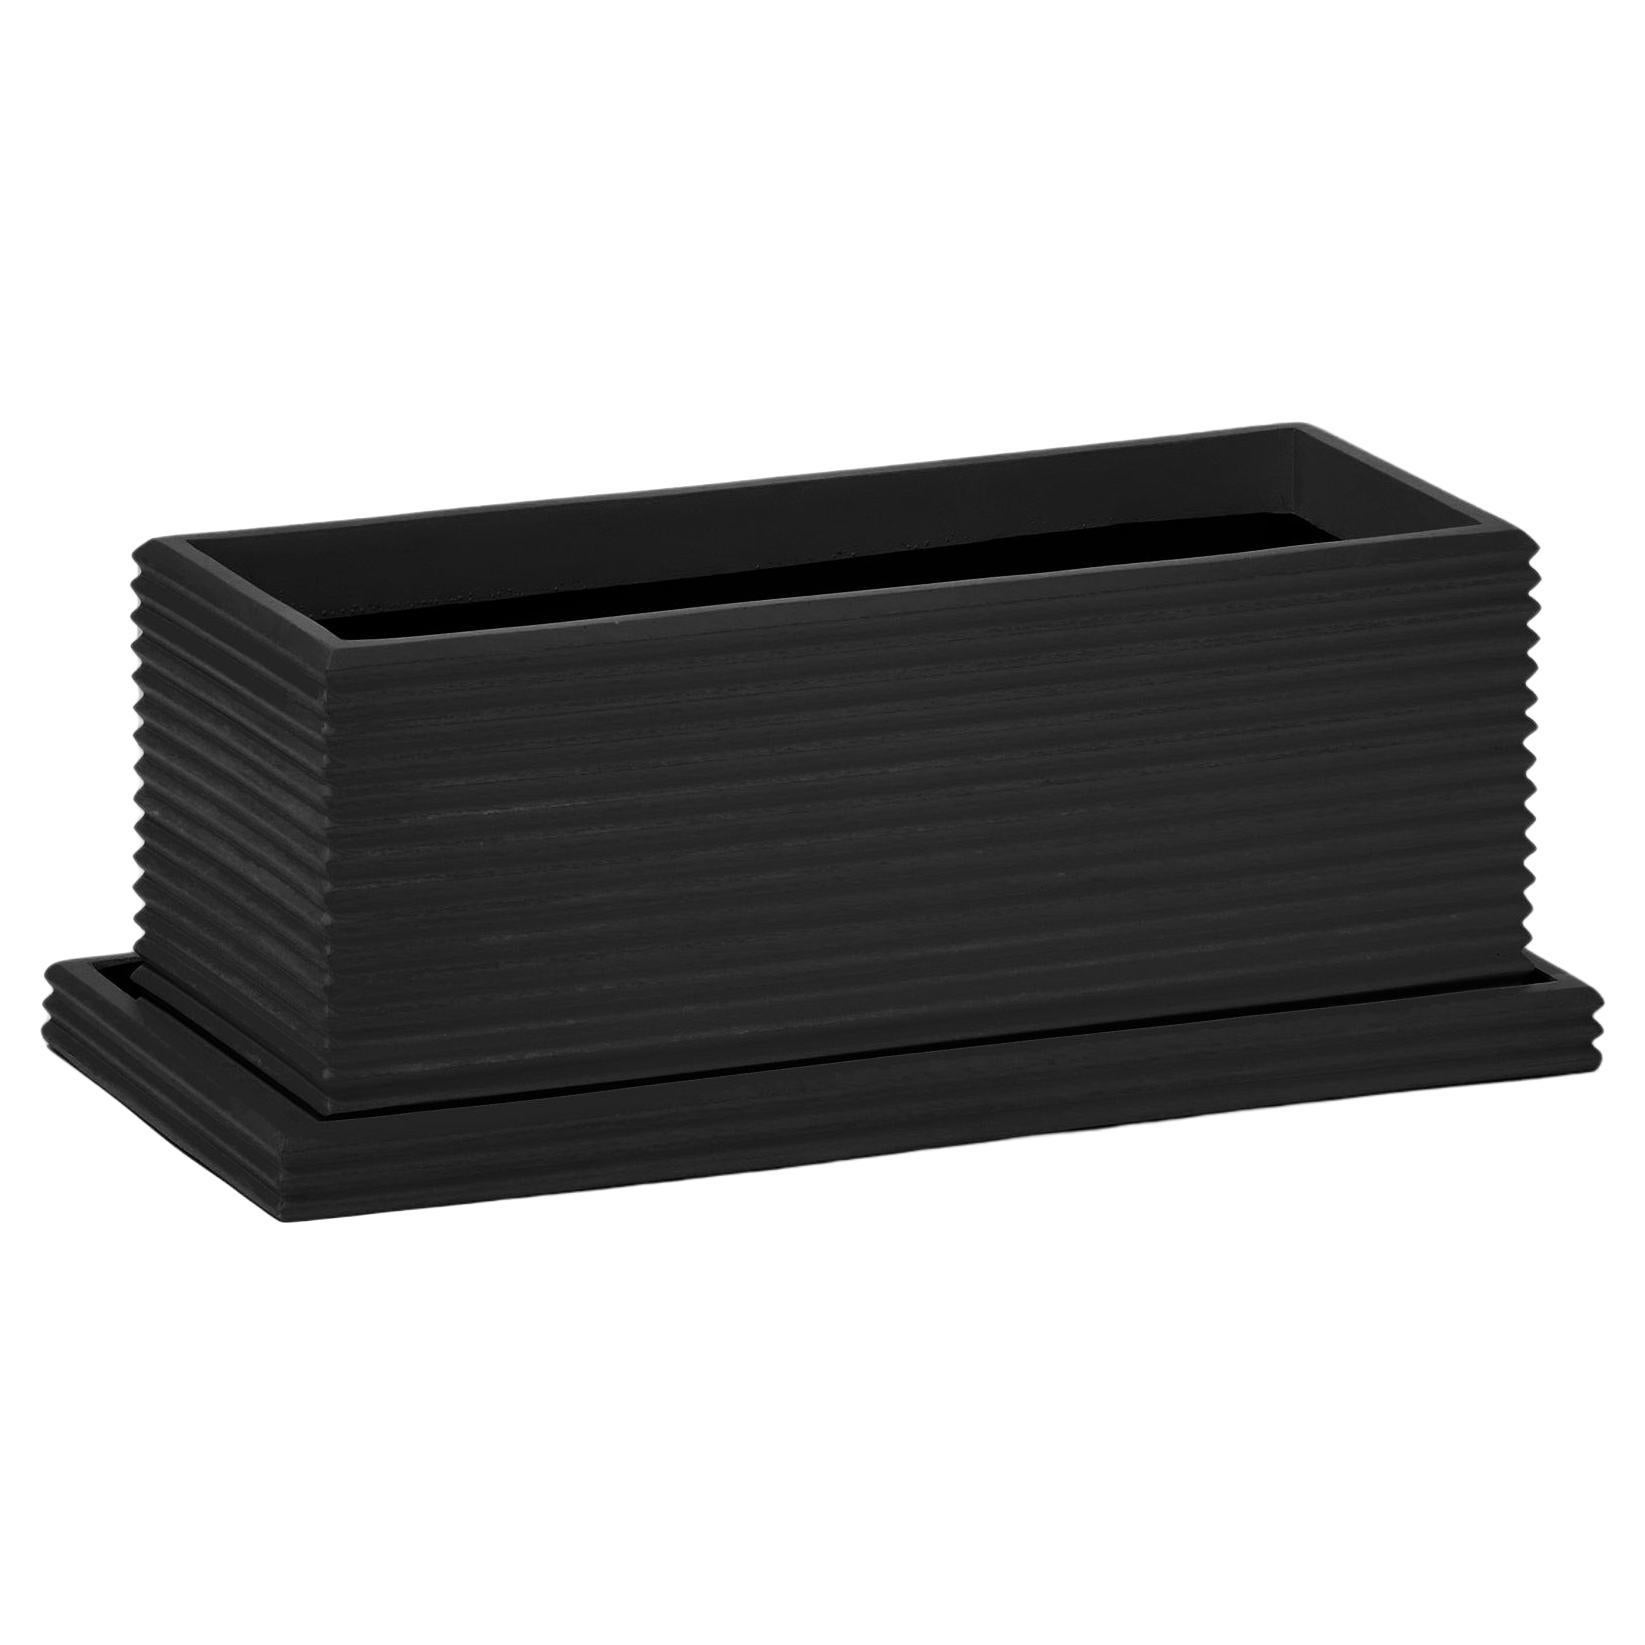 Standard Wide Rectangular Planter 'Black' by TFM, Represented by Tuleste Factory